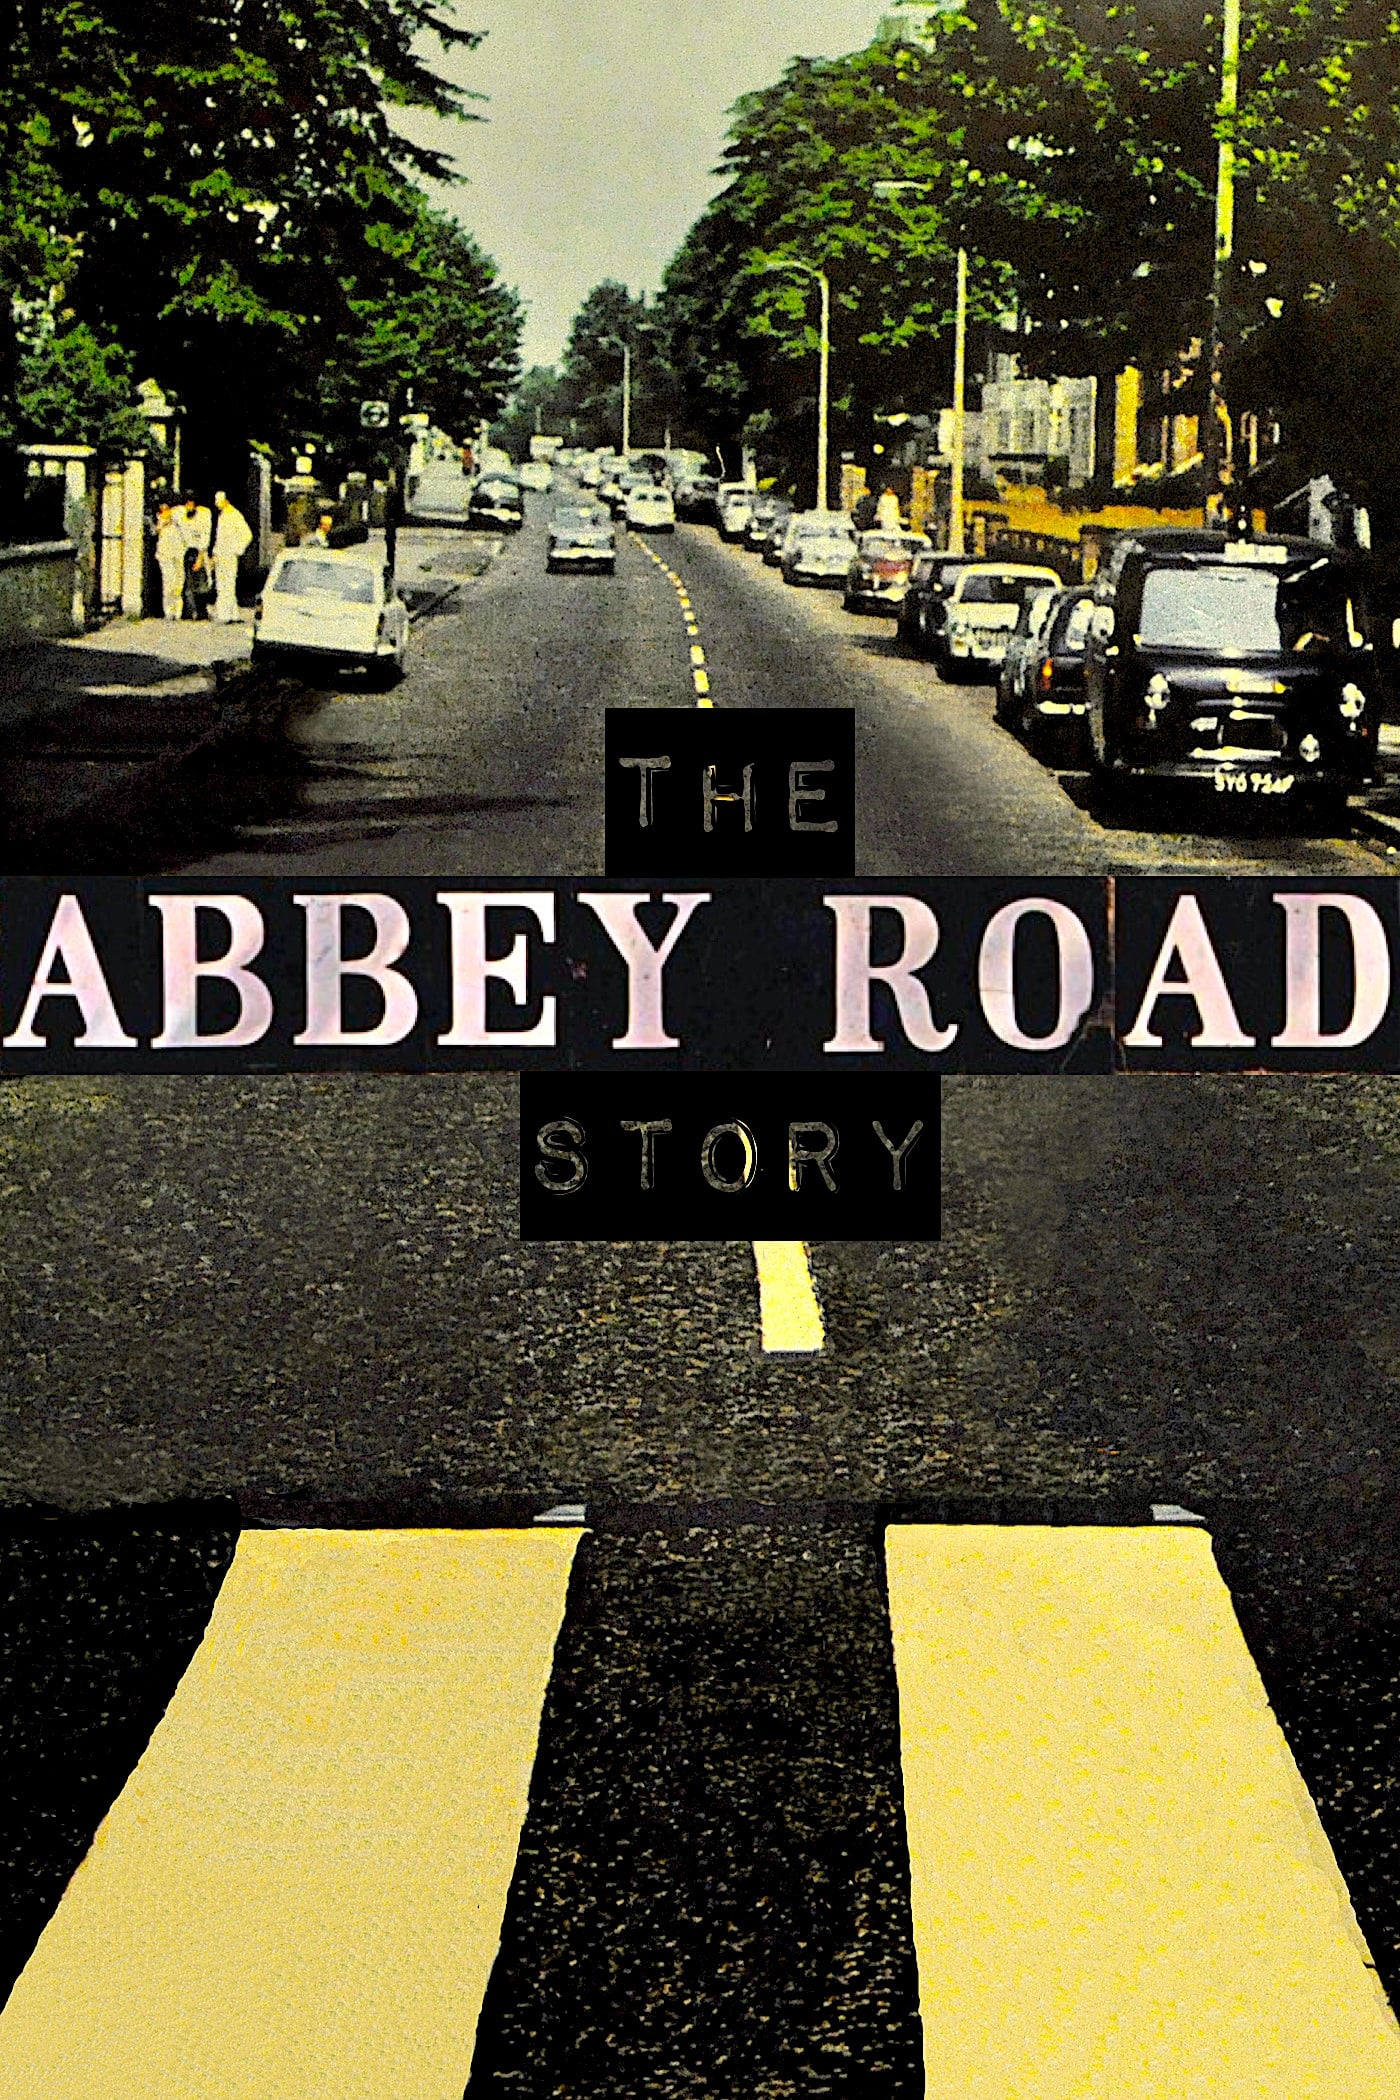 The Abbey Road Story